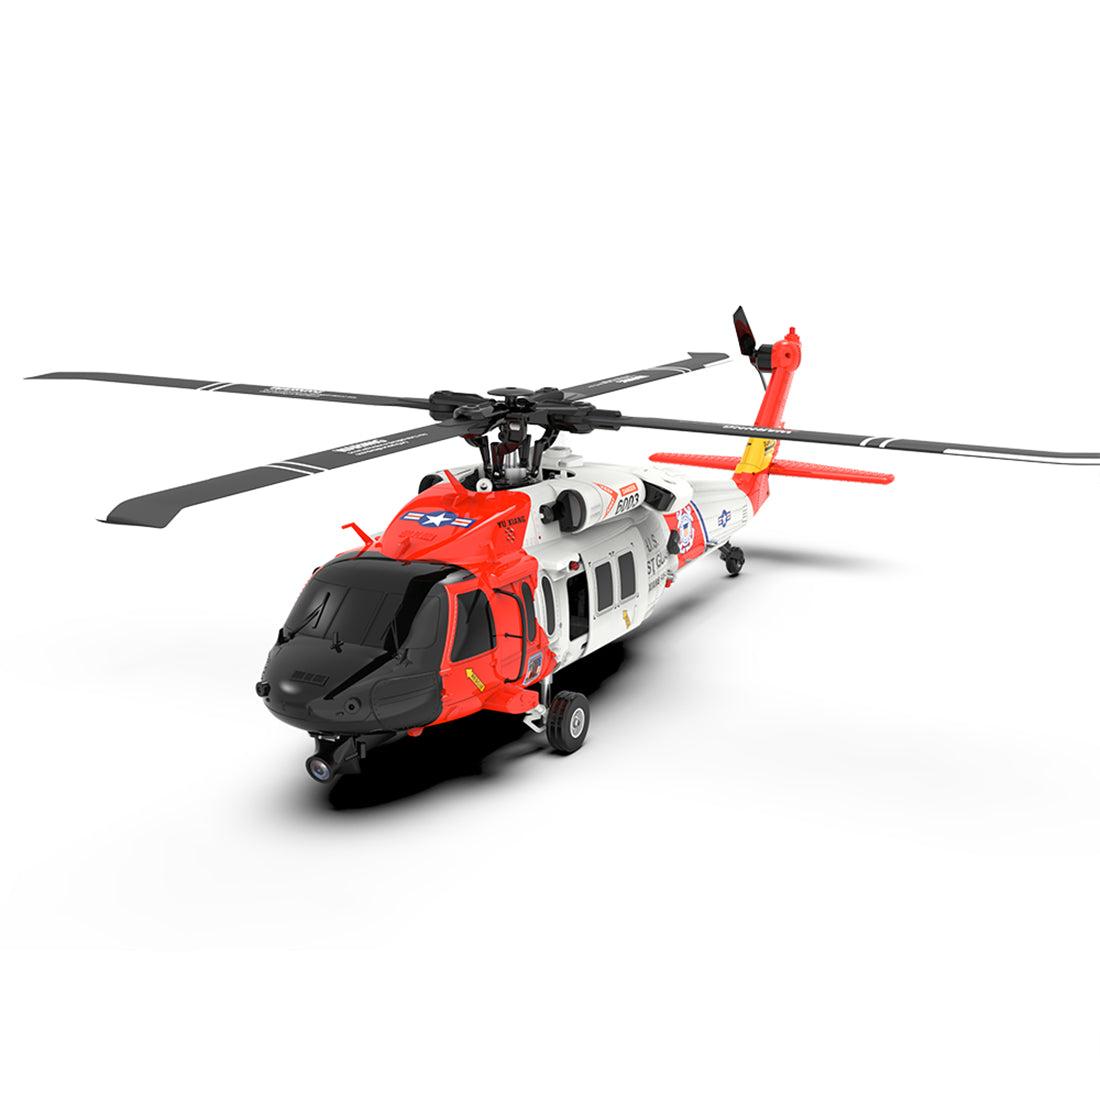 Rc Uh60: Powerful and Easy-to-Use RC UH60: Specifications and Where to Buy